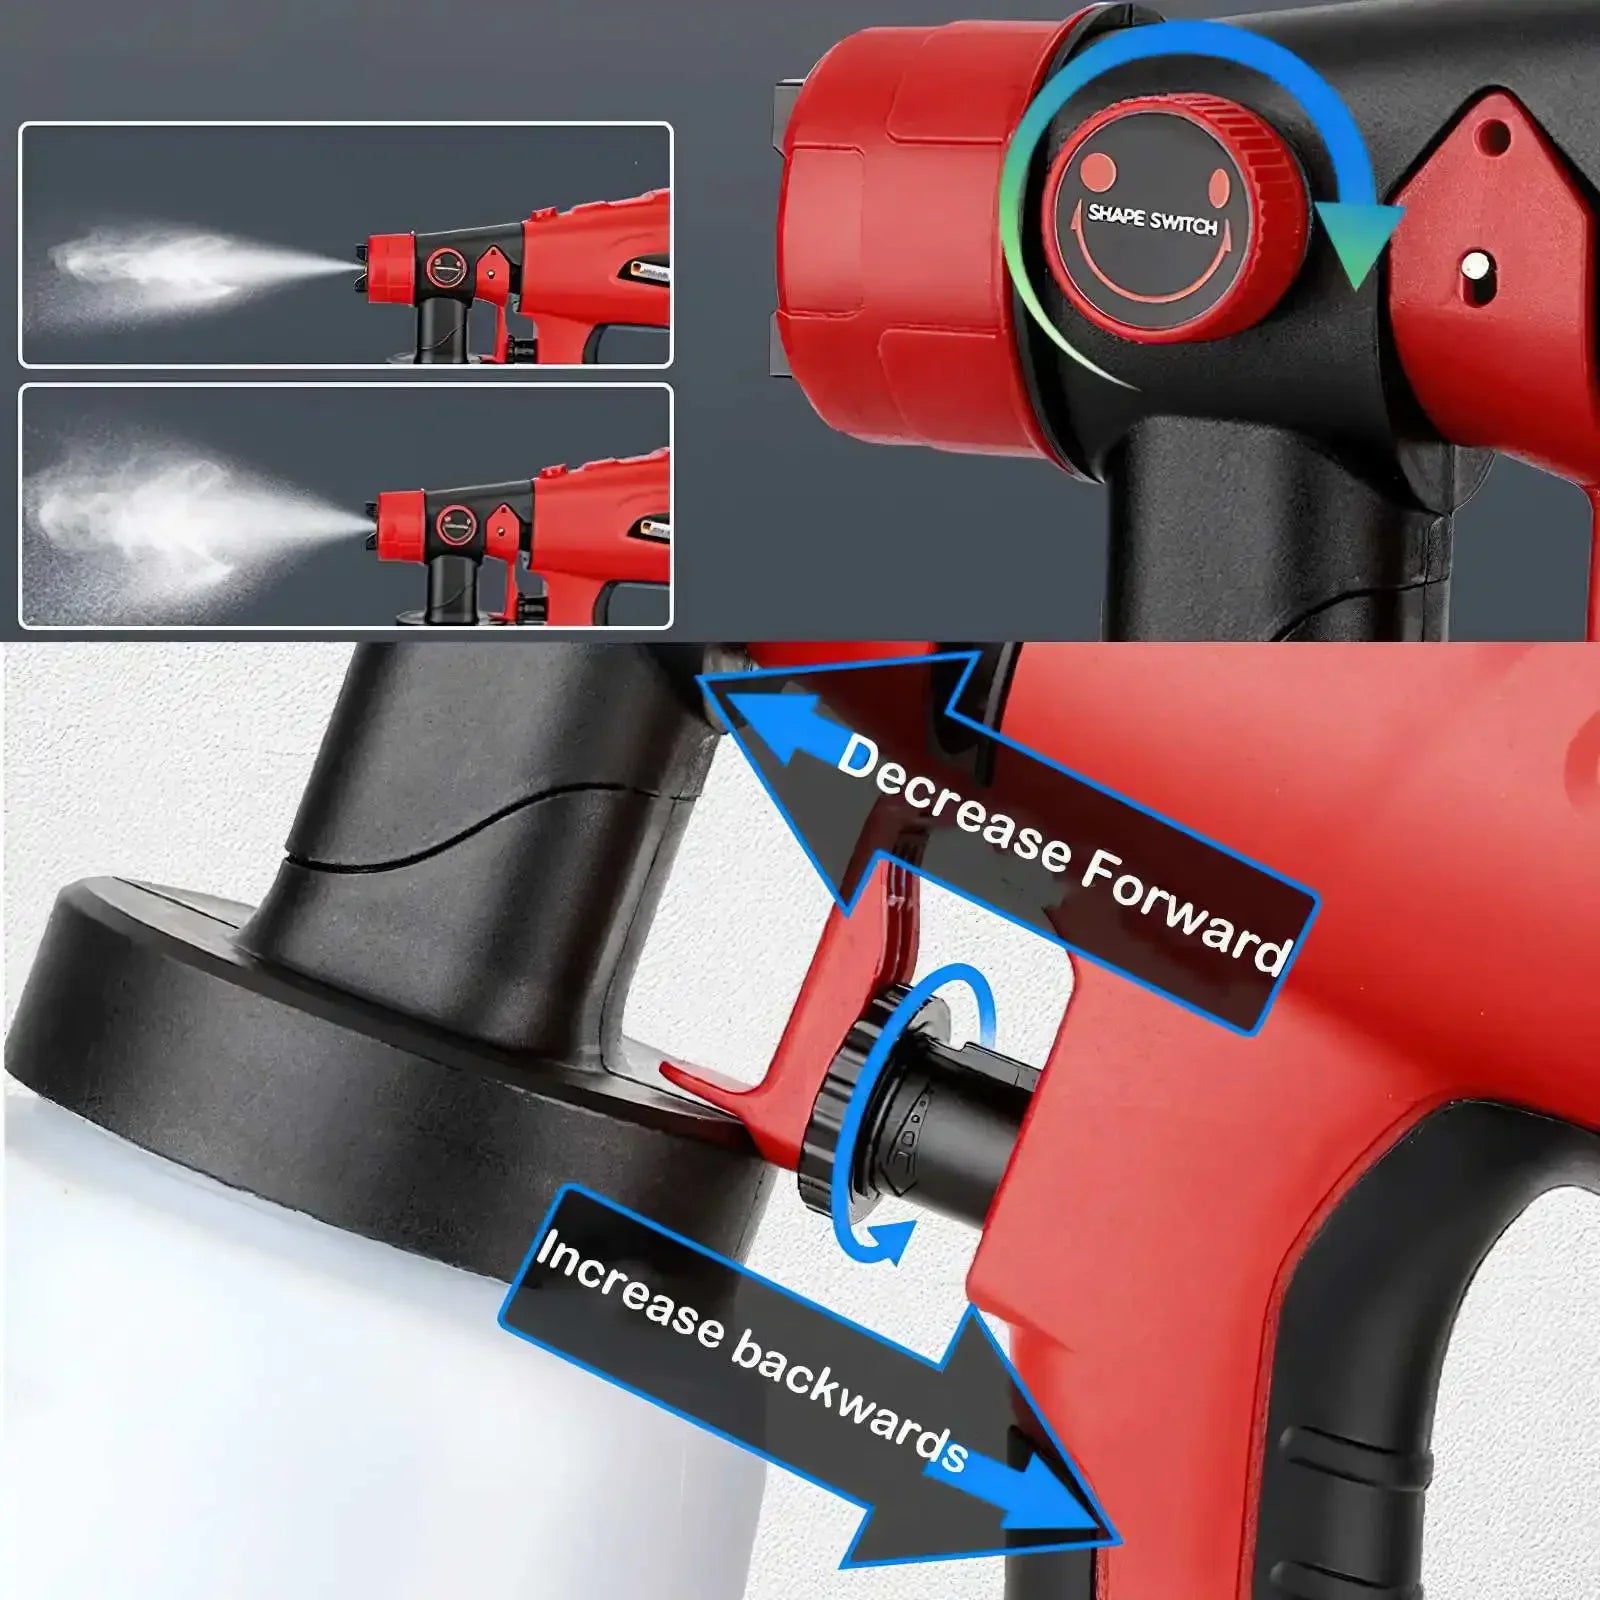 Electric Spray Gun, Cordless Operation, Compatible with Multiple Battery Brands